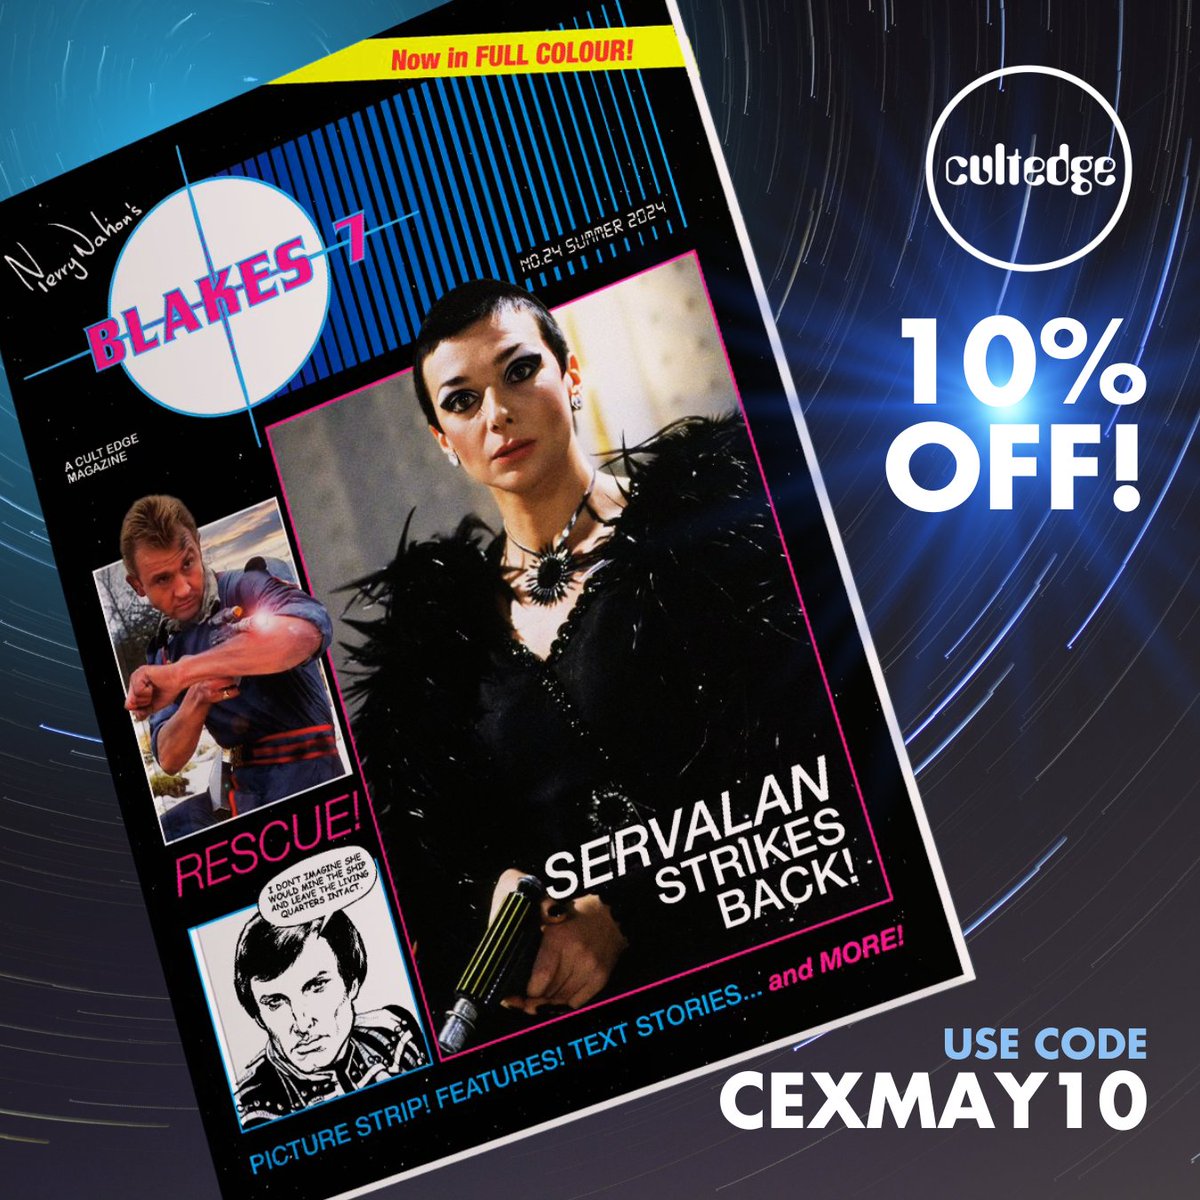 Get 10% off the brand new issue of #Blakes7 Magazine. 124 pages filled with new features, interviews, never-before-seen pictures, comic strip action and amazing new fiction. Grab your copy from bit.ly/b7magazine24 Use code CEXMAY10 - offer expires this Friday!